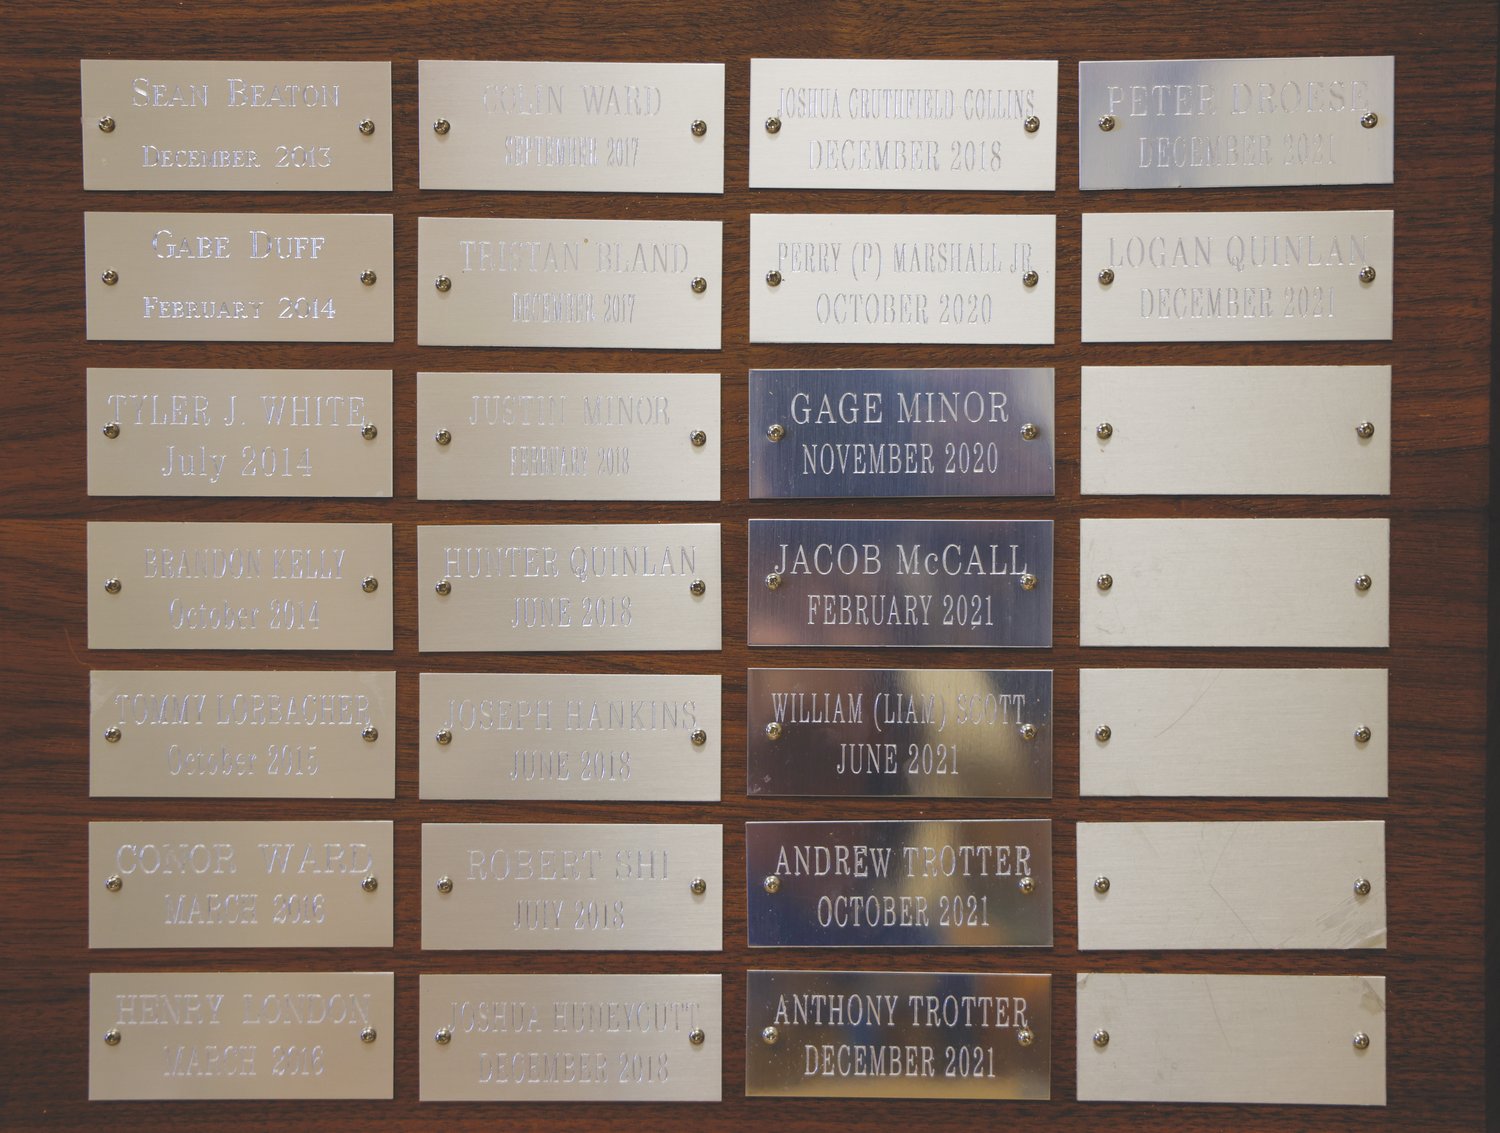 This plaque shows members of Troop 93 who have achieved the rank of Eagle Scout.